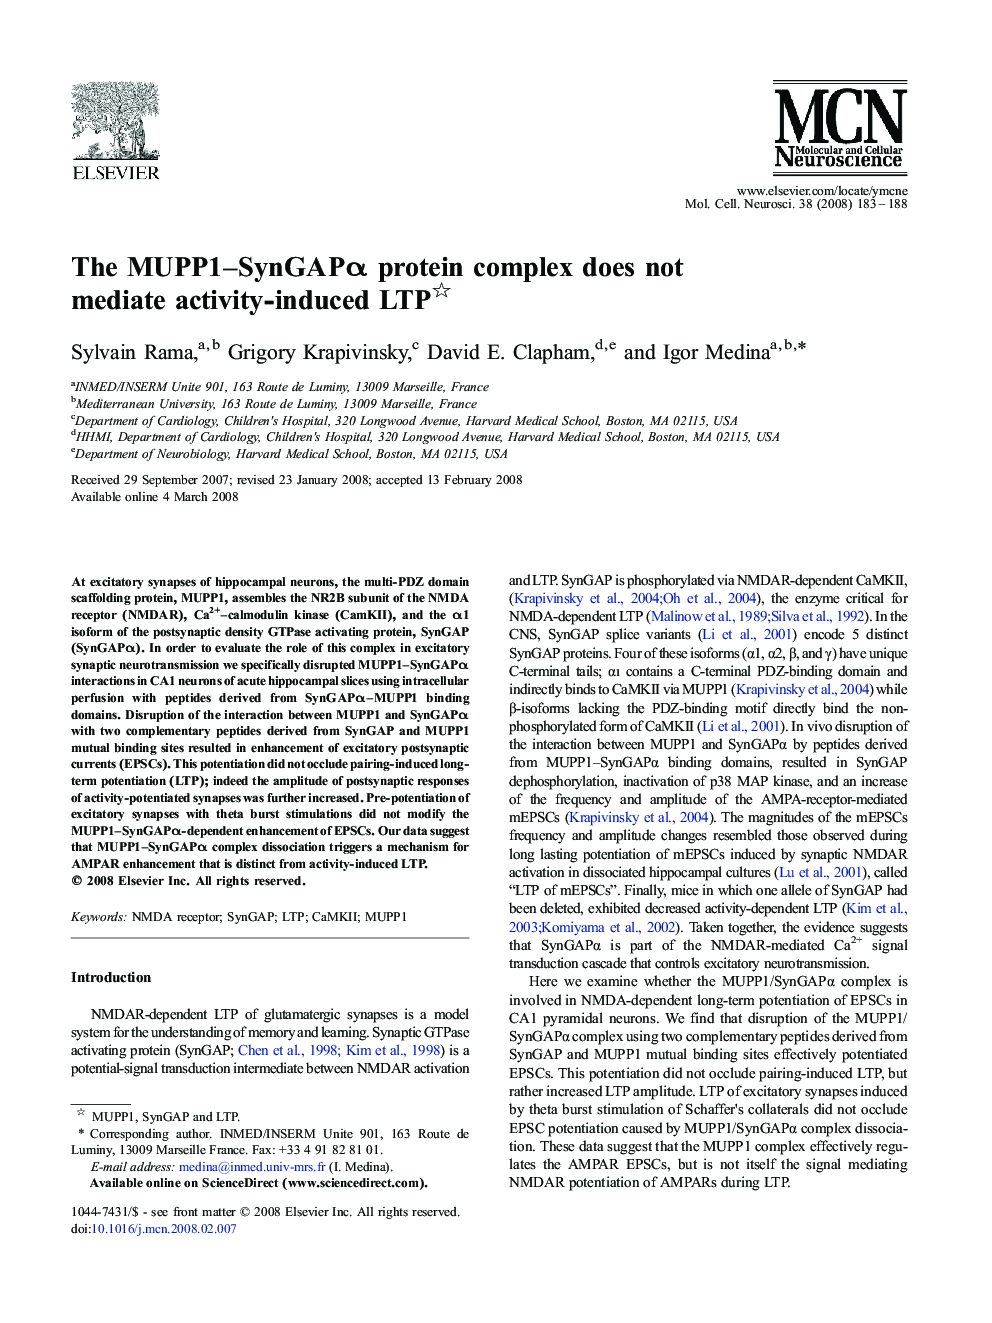 The MUPP1–SynGAPα protein complex does not mediate activity-induced LTP 